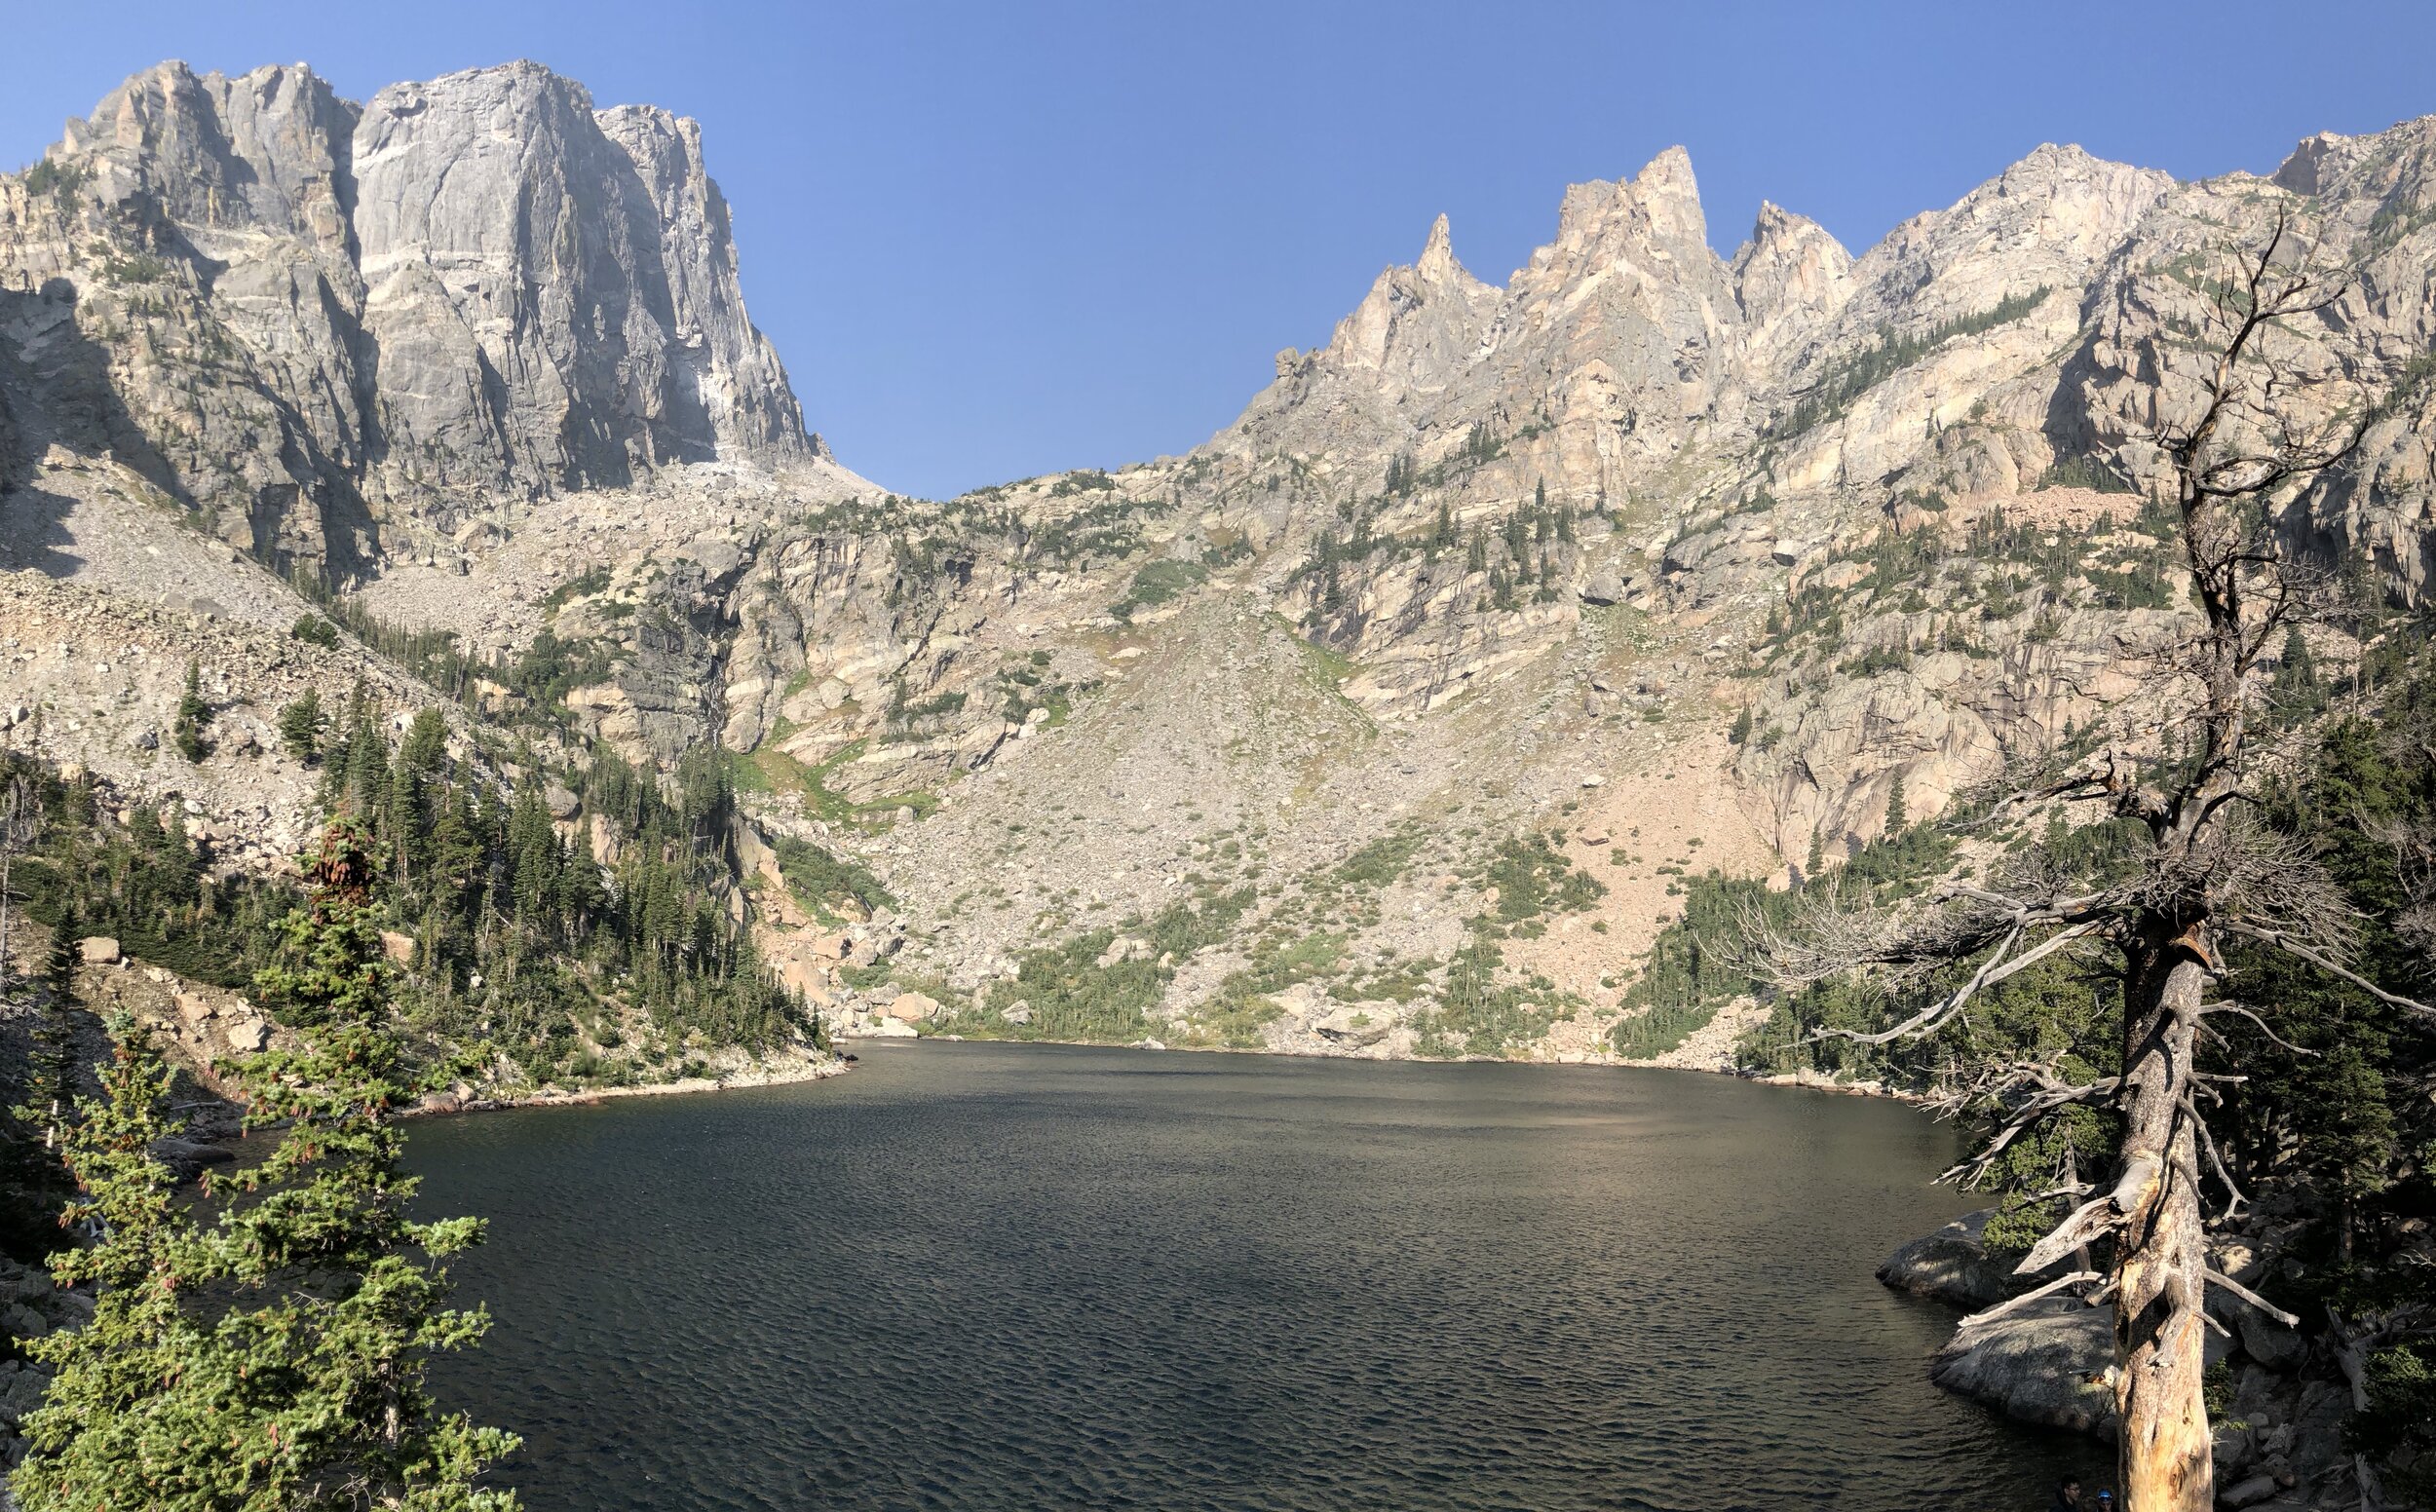 Emerald Lake is indeed a jewel, but it’s only one of many spectacular high-elevation lakes in Rocky.